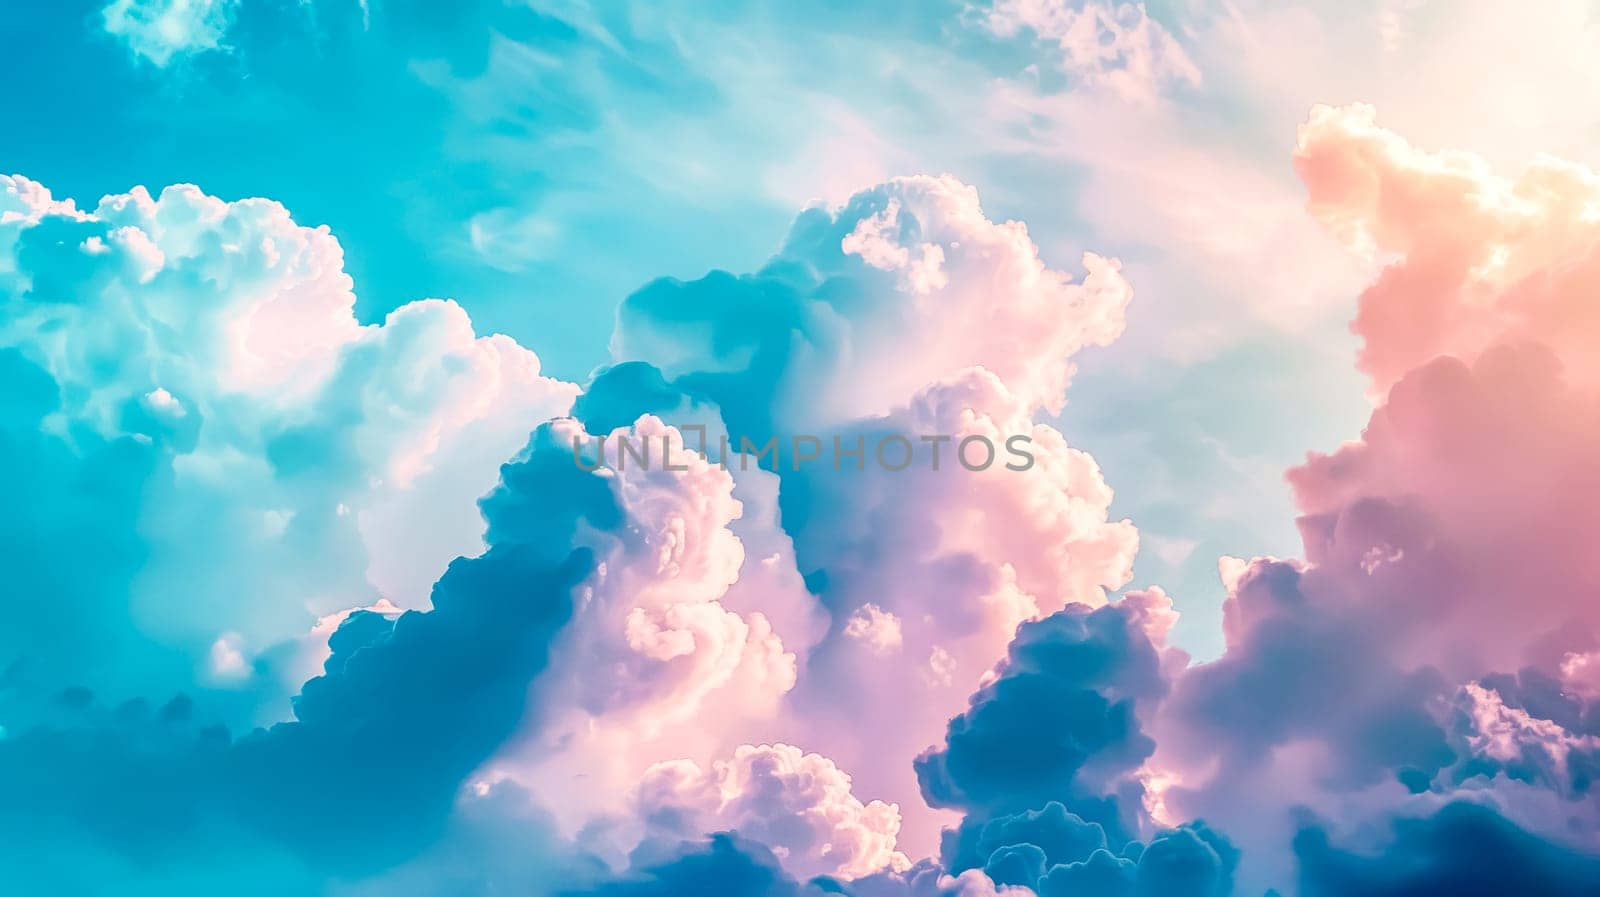 Tranquil sky with fluffy clouds bathed in soft pastel hues